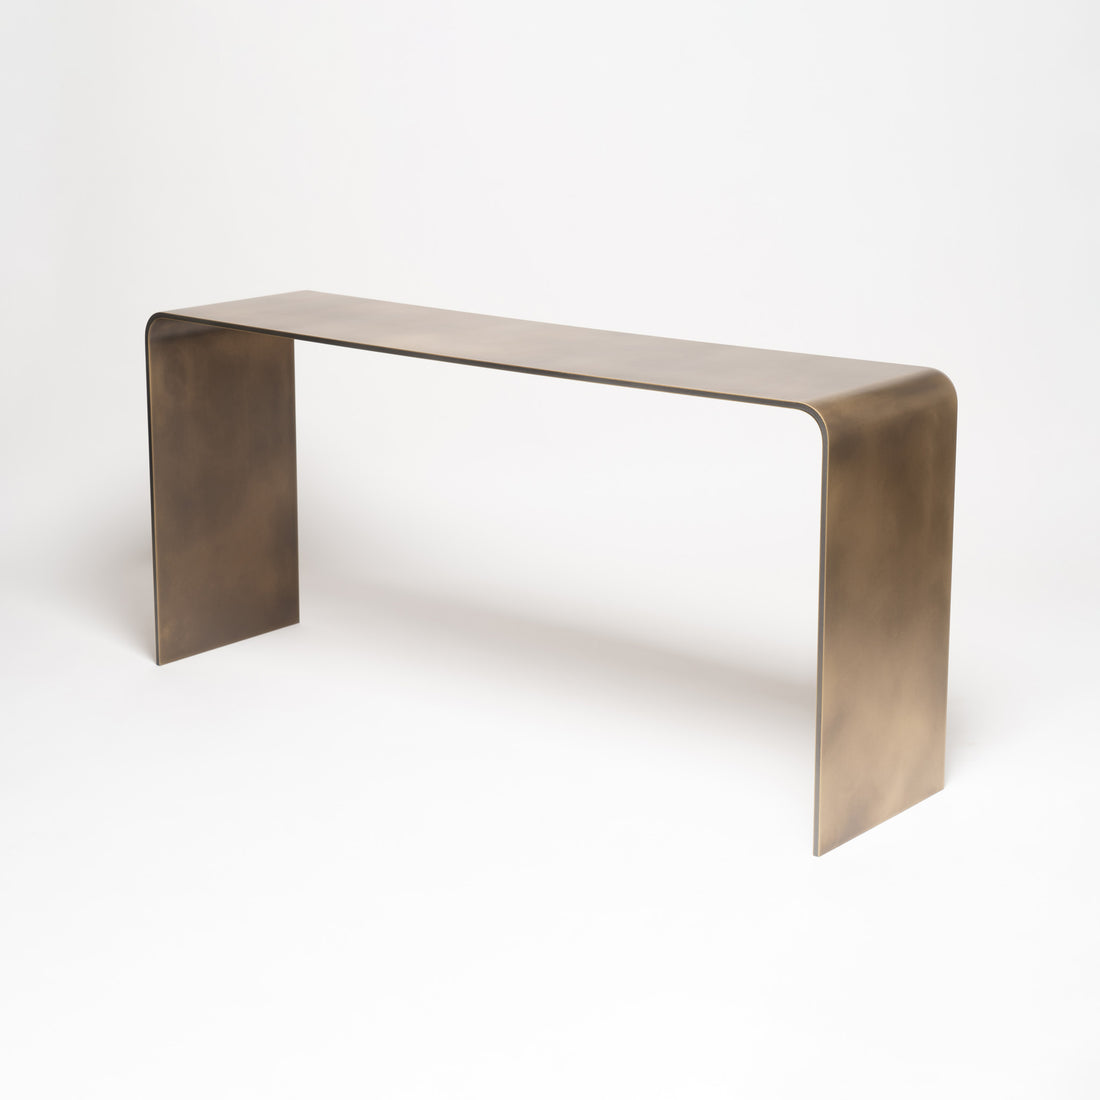 Wasserfall Console Table